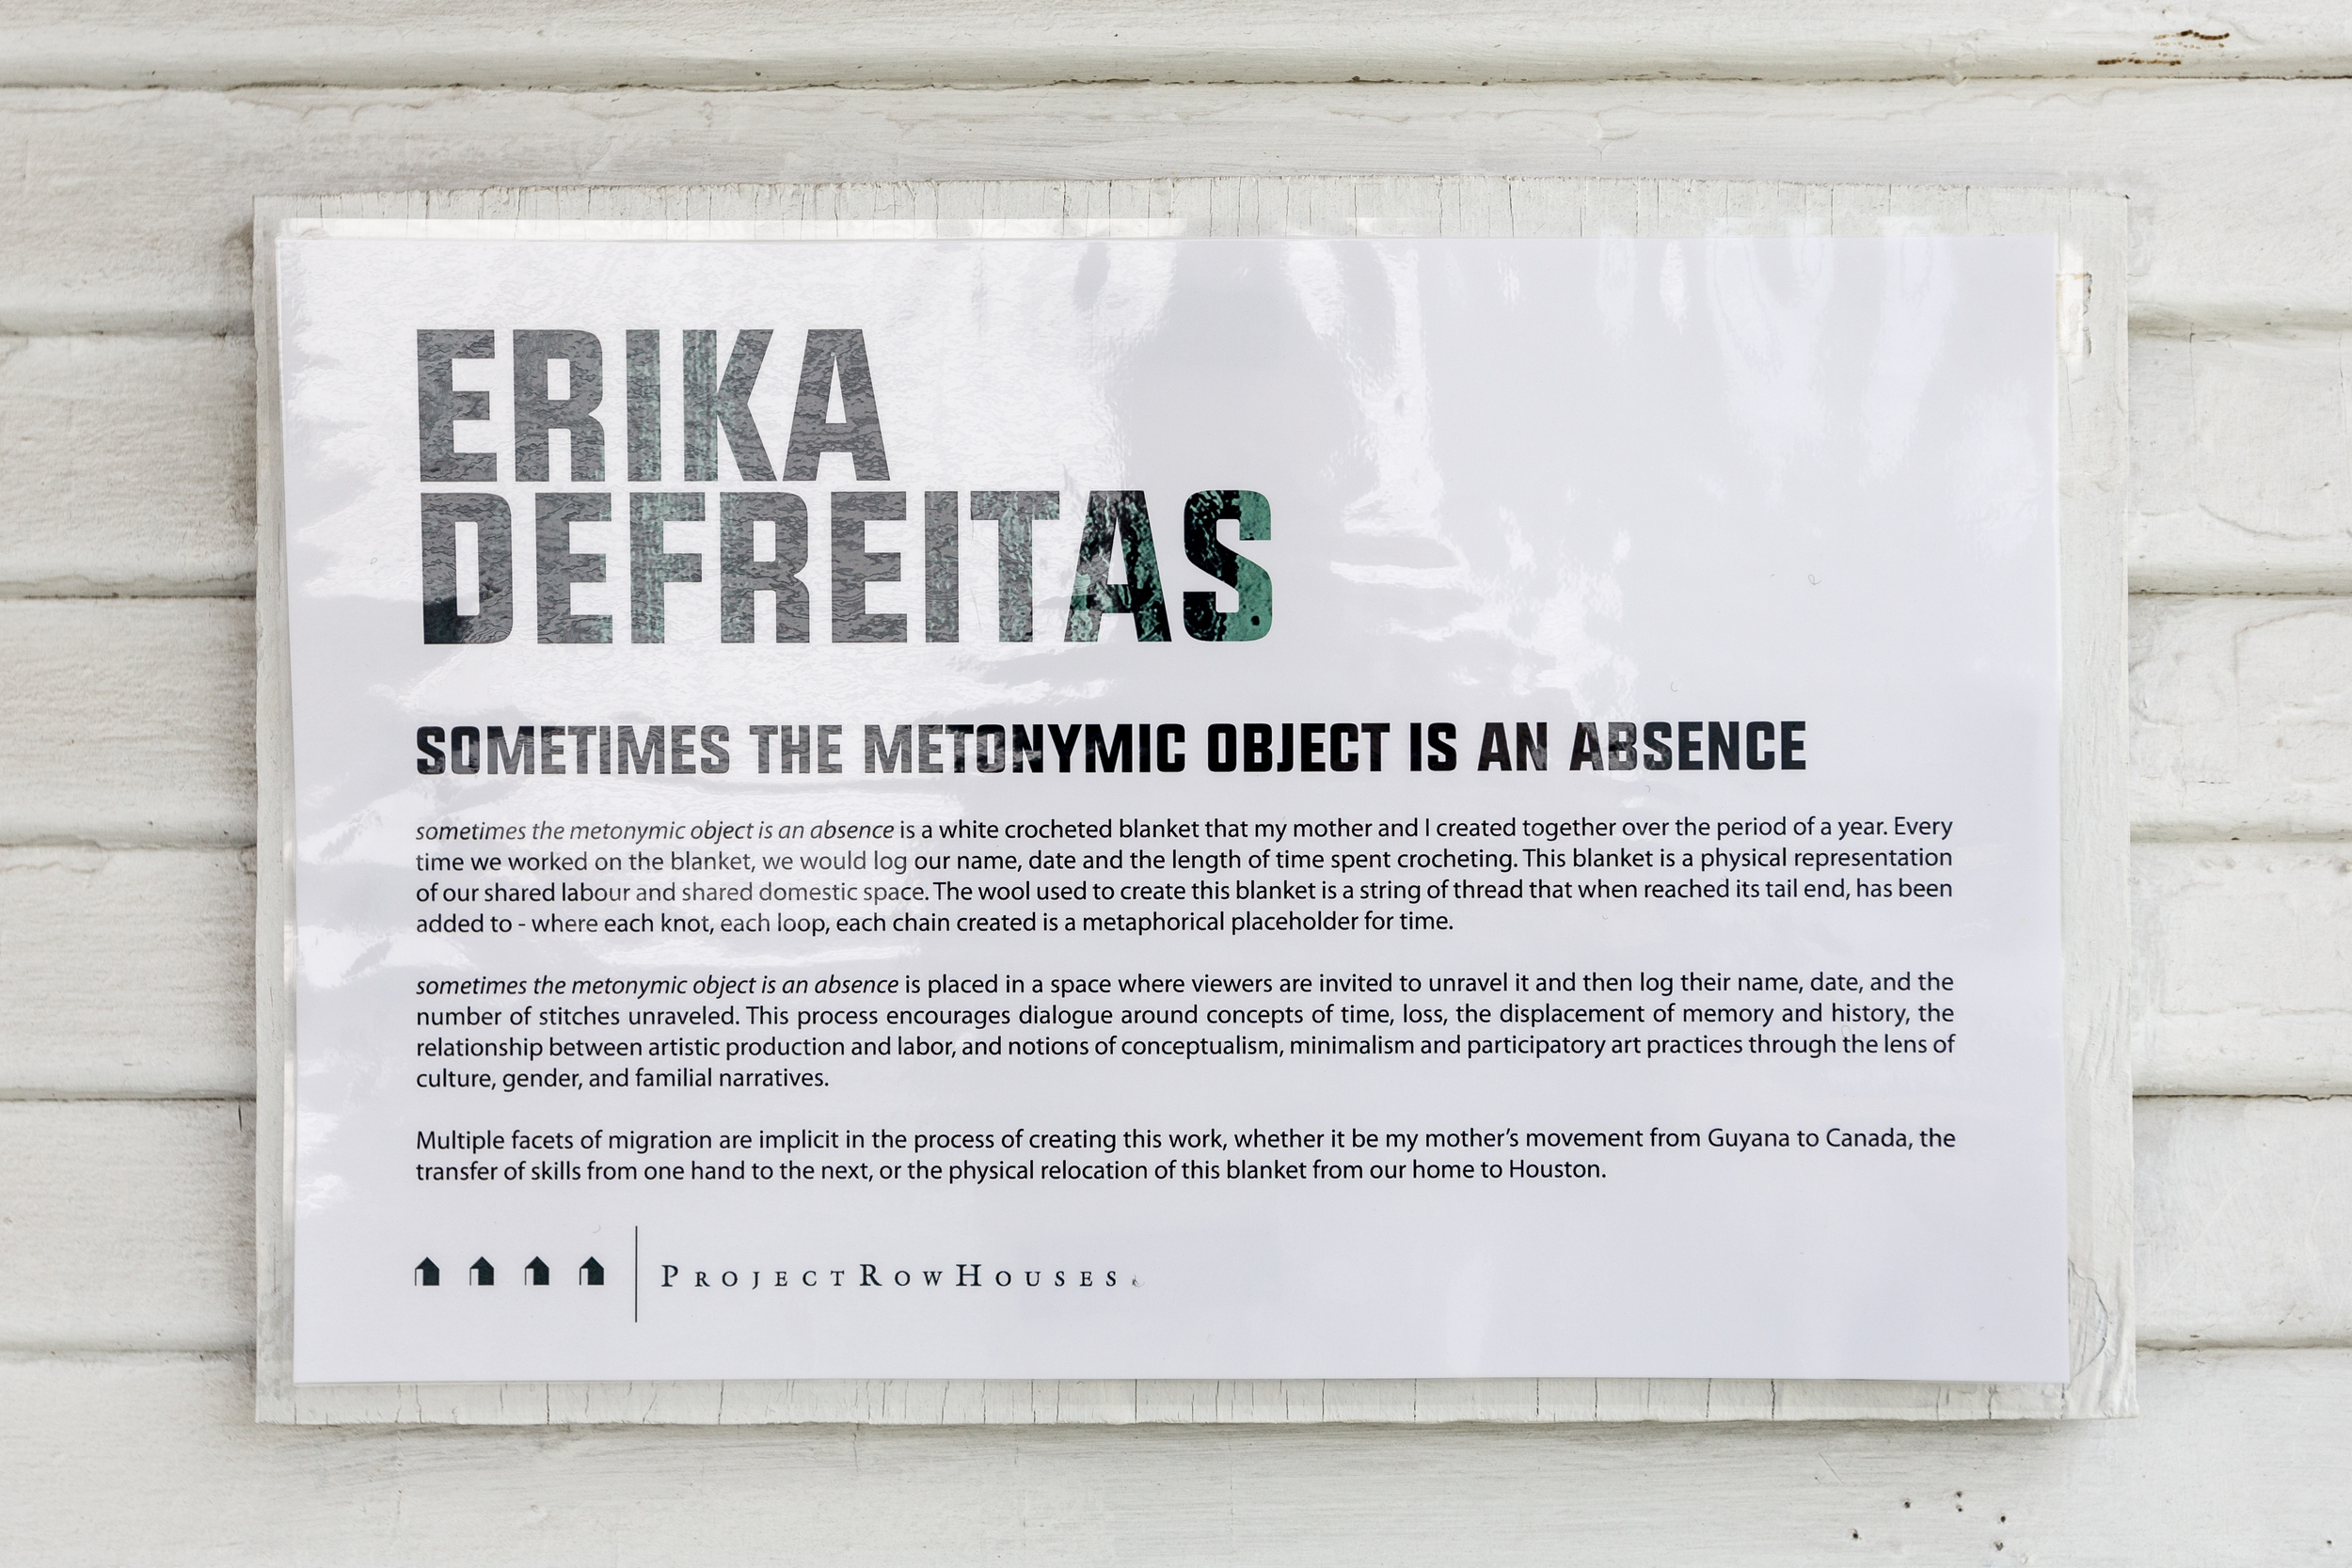  Erika DeFreitas, sometimes the metonymic object is an absence 